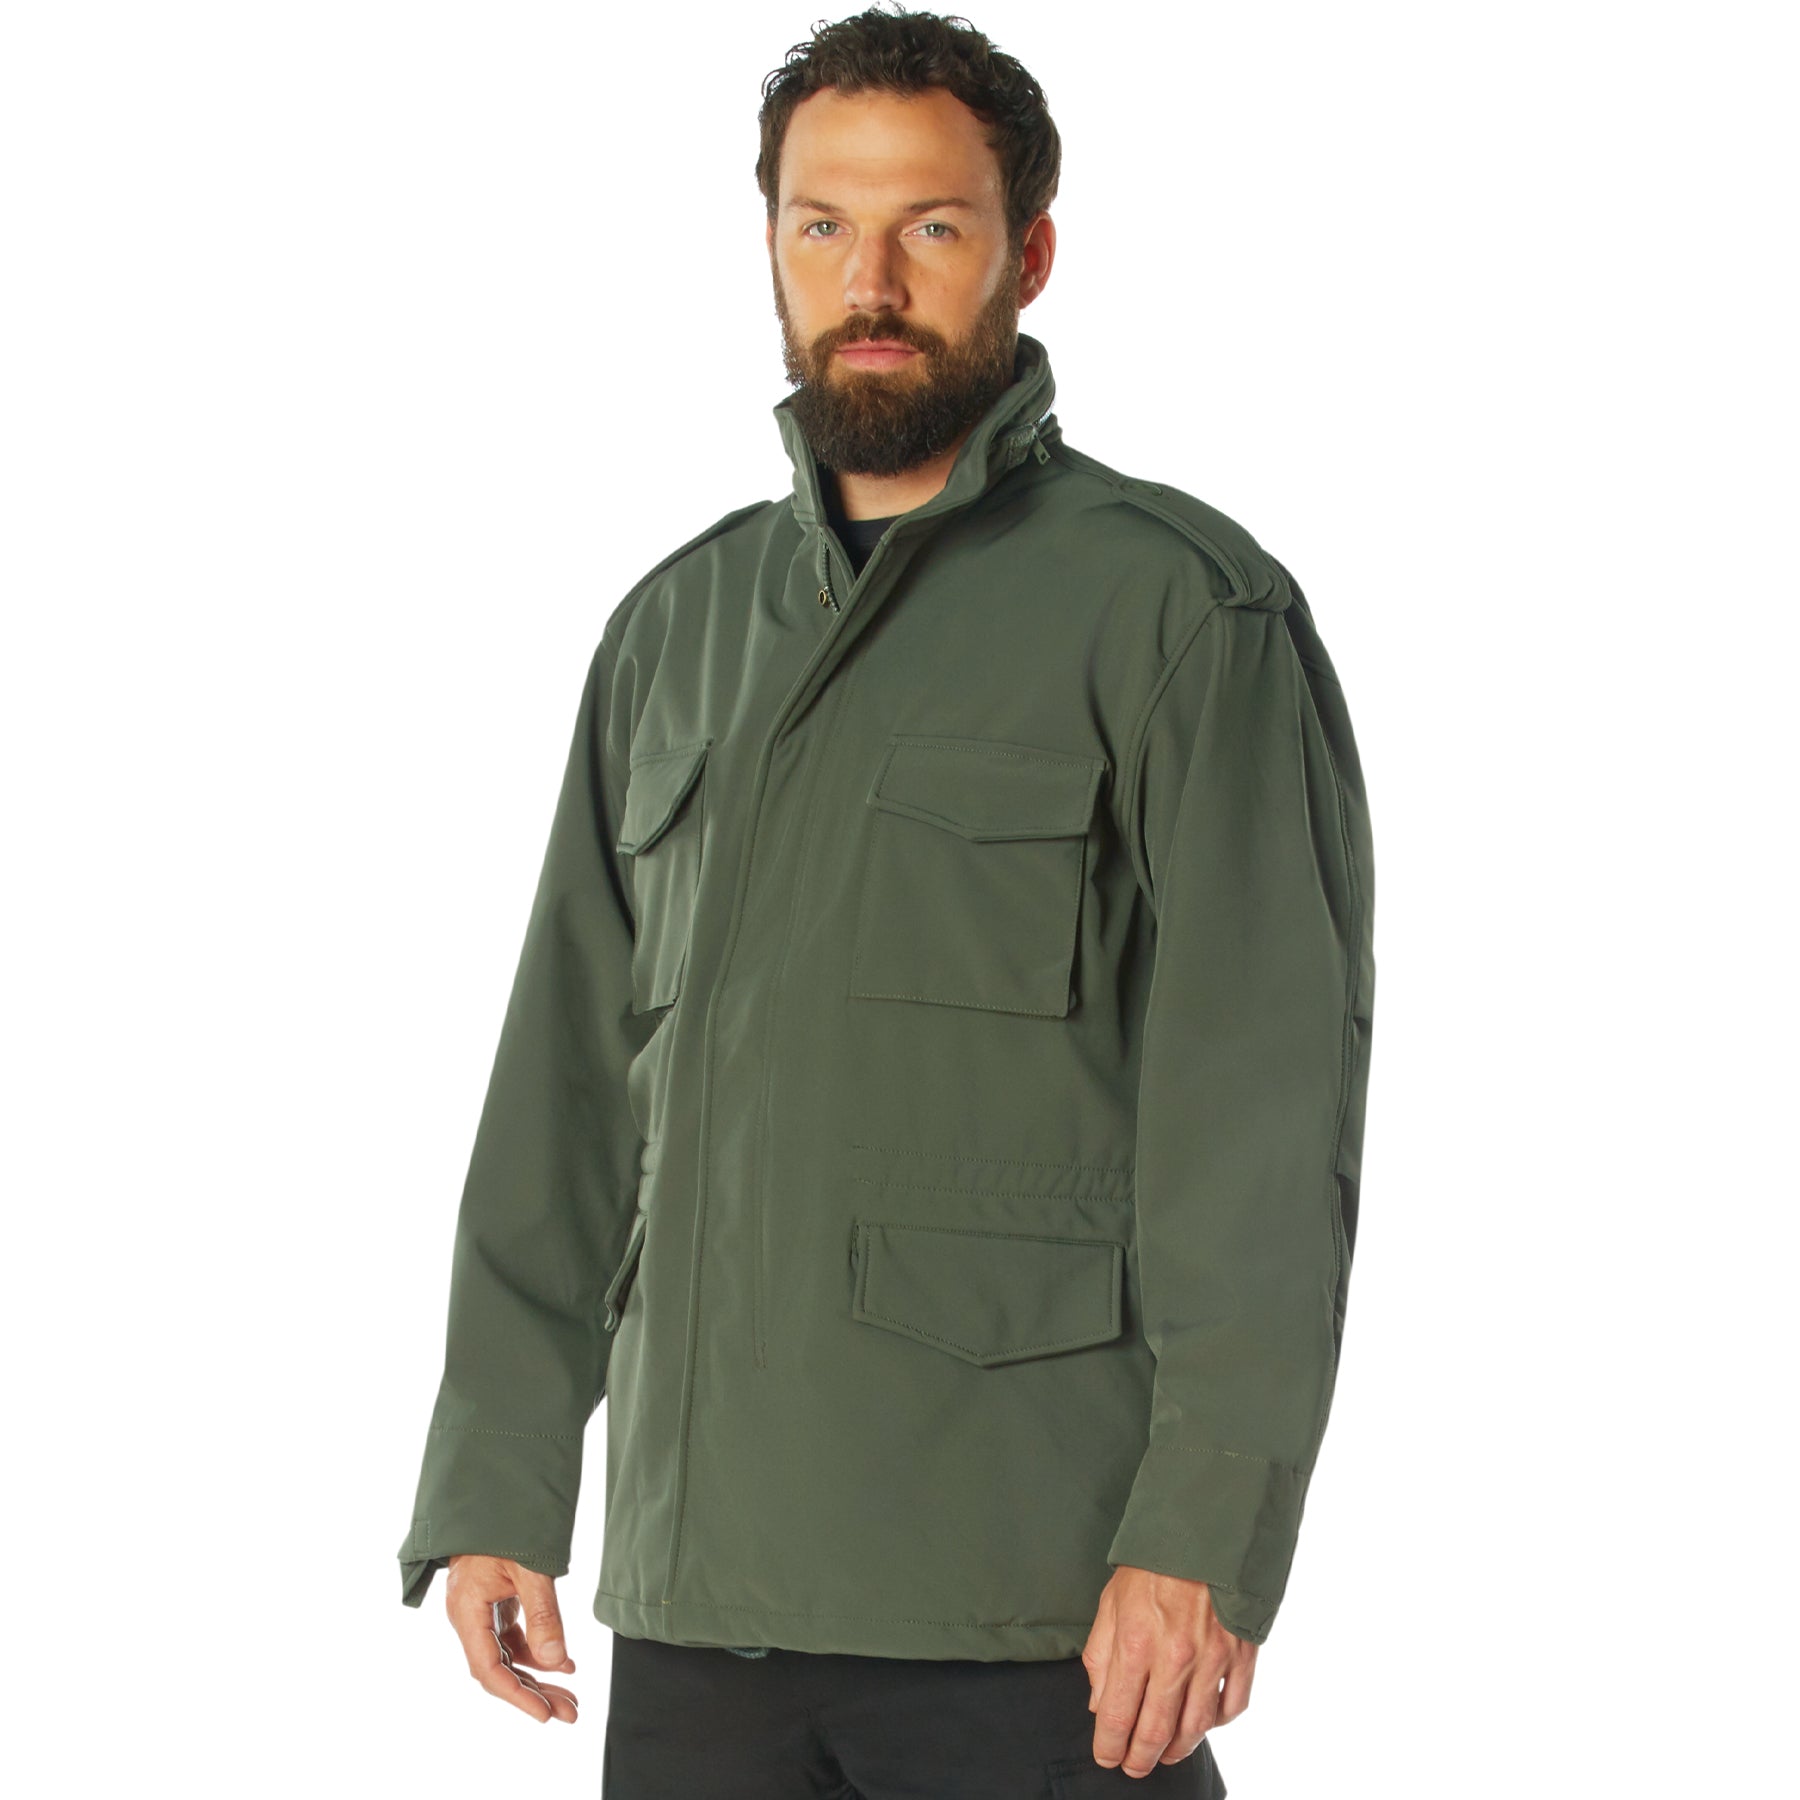 Poly Soft Shell Tactical M-65 Field Jackets Olive Drab